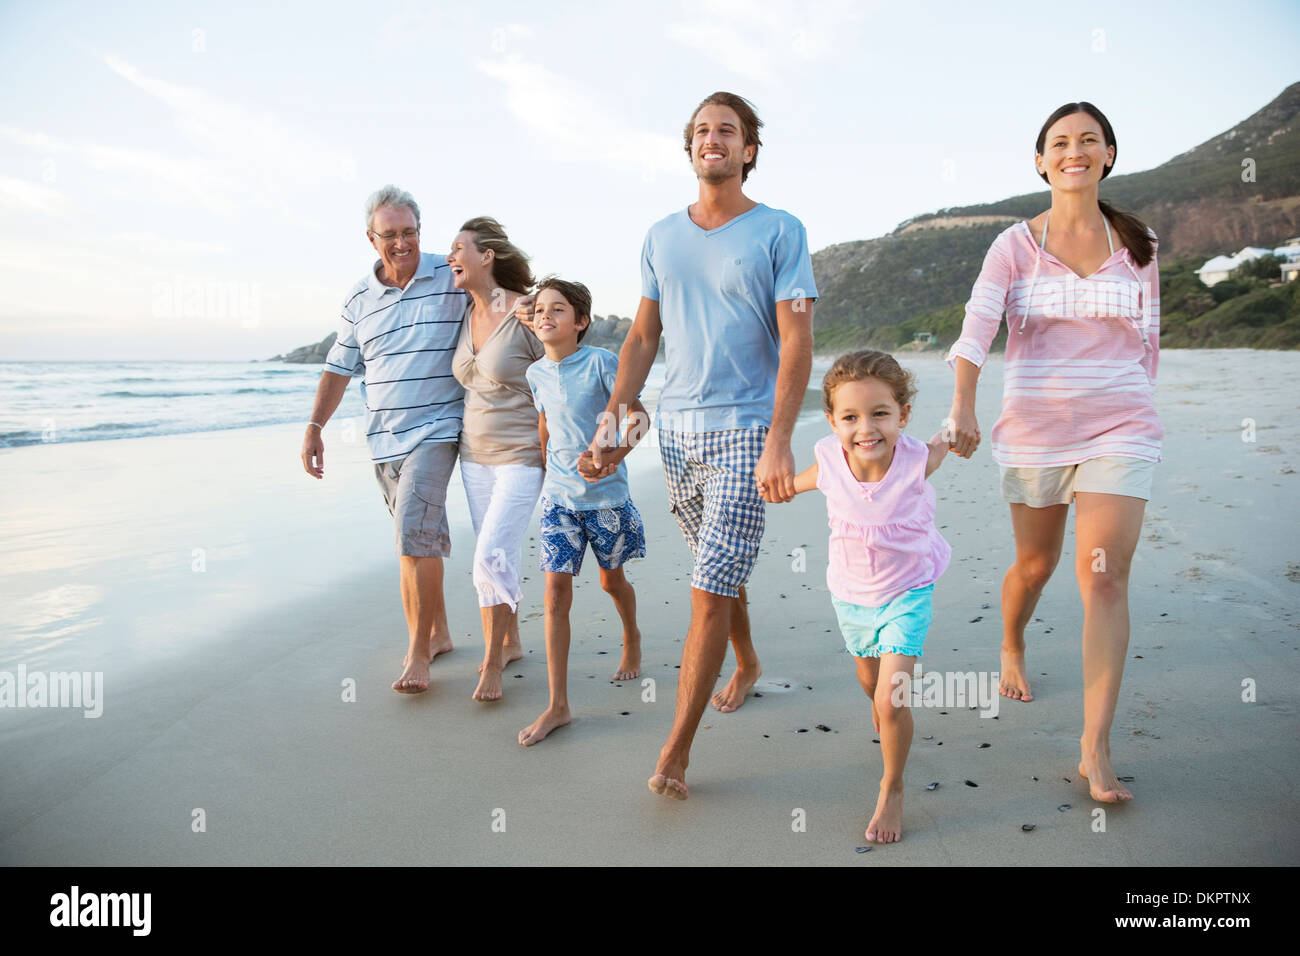 Family walking together on beach Stock Photo